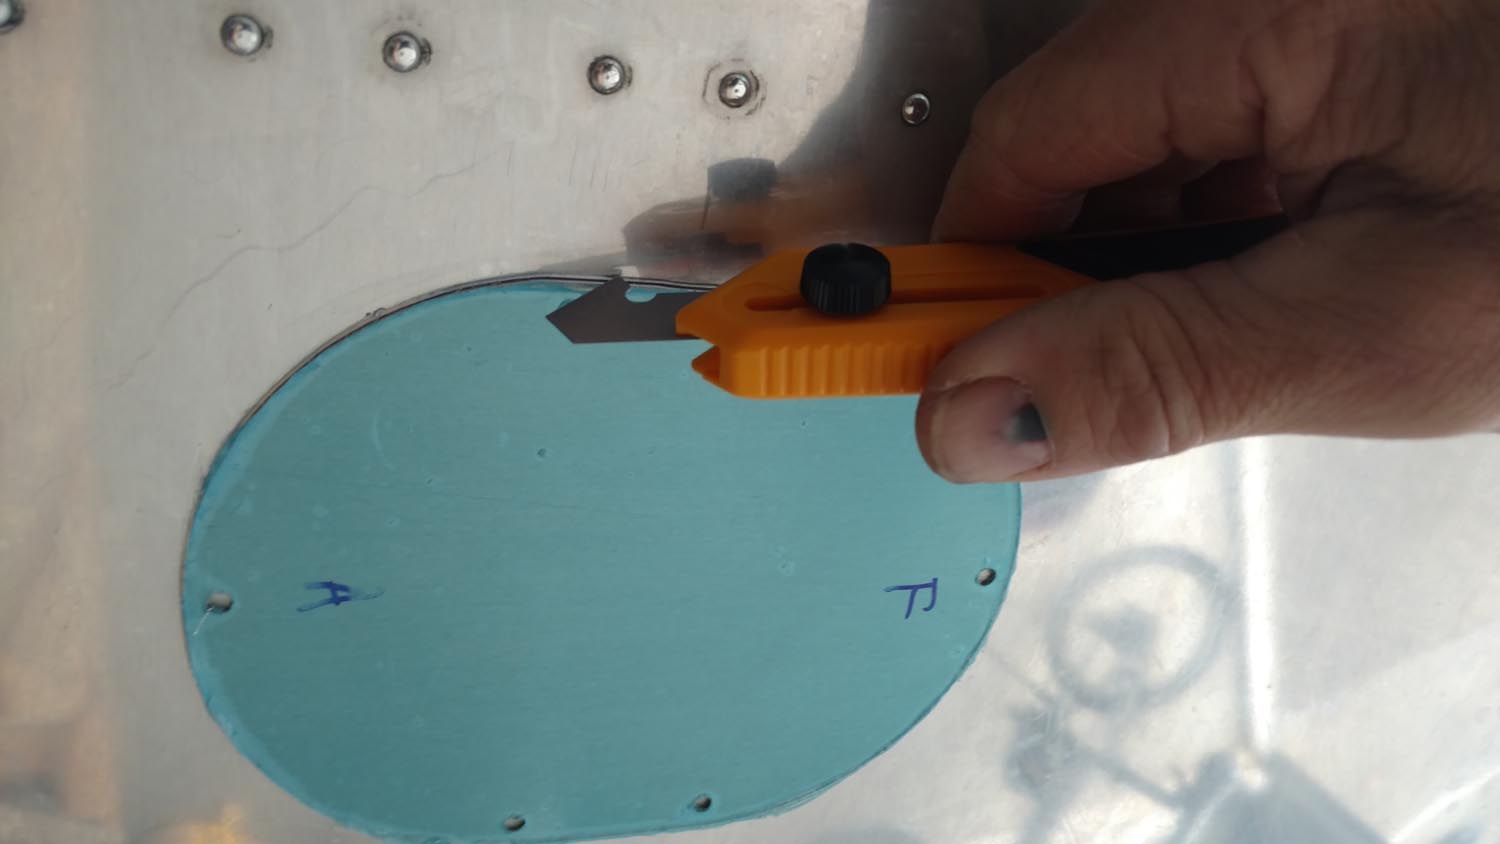 Using an “Olfa Knife” to create an access hole in the wing.